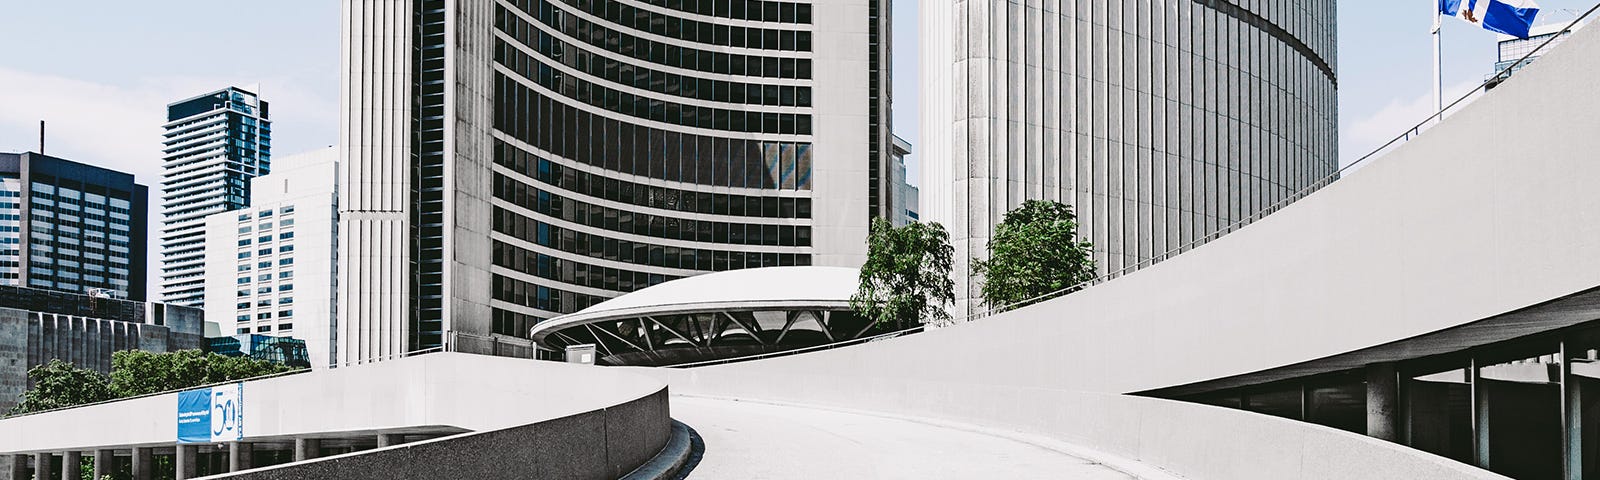 Ramp at Toronto City Hall leading to the Green Roof